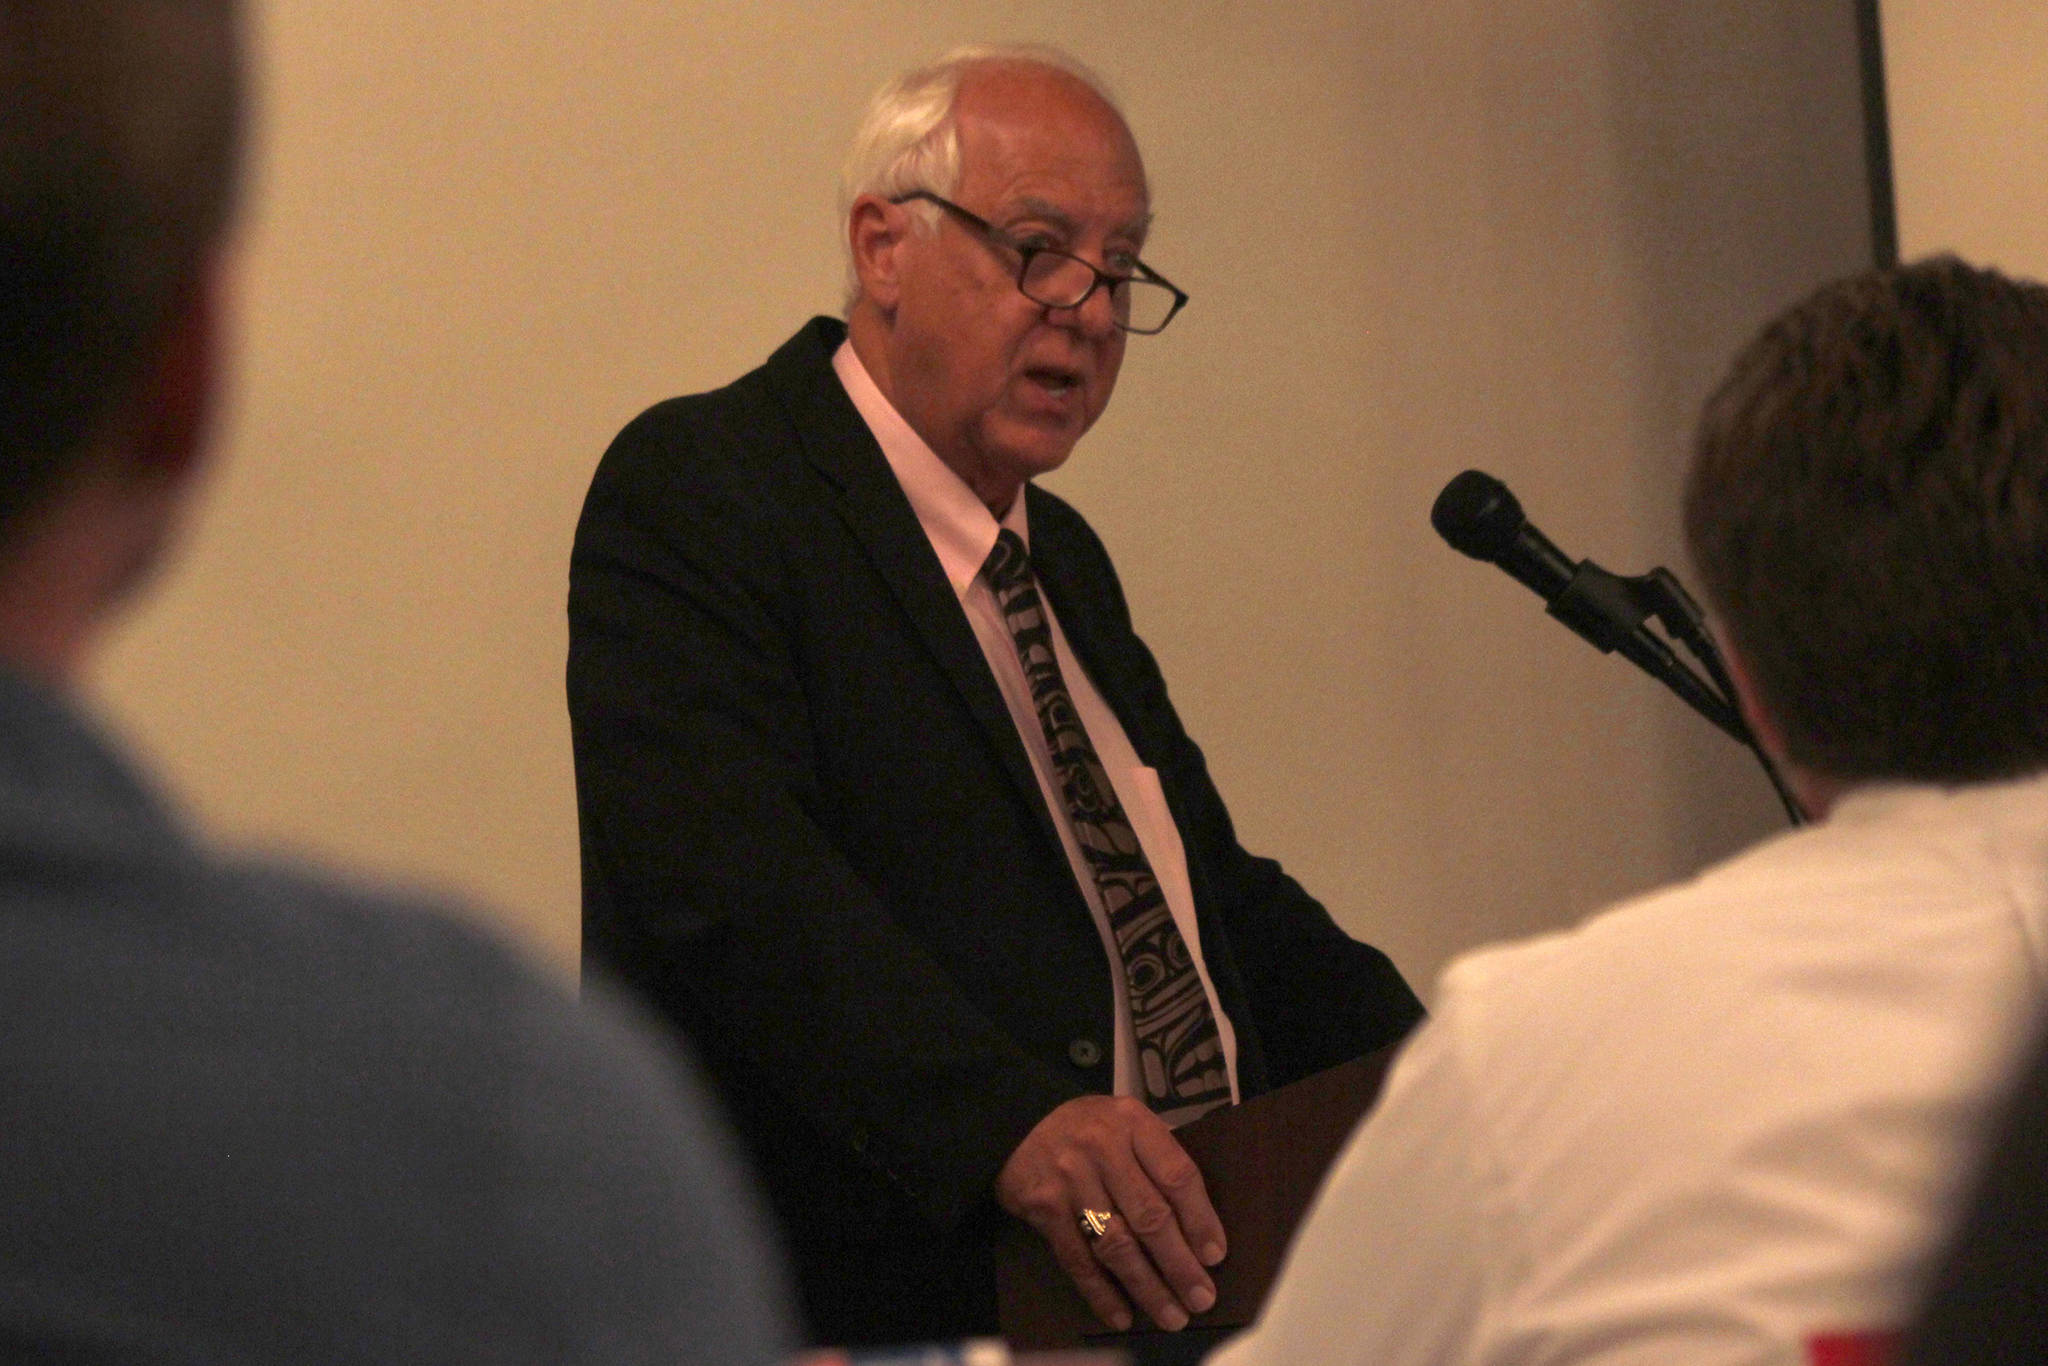 Mayor Ken Koelsch speaks at the Juneau Chamber of Commerce luncheon on Thursday, Aug. 30, 2018. Koelsch, who is not running for re-election this fall, reflected on his two and a half years as mayor during the speech. (Alex McCarthy | Juneau Empire)